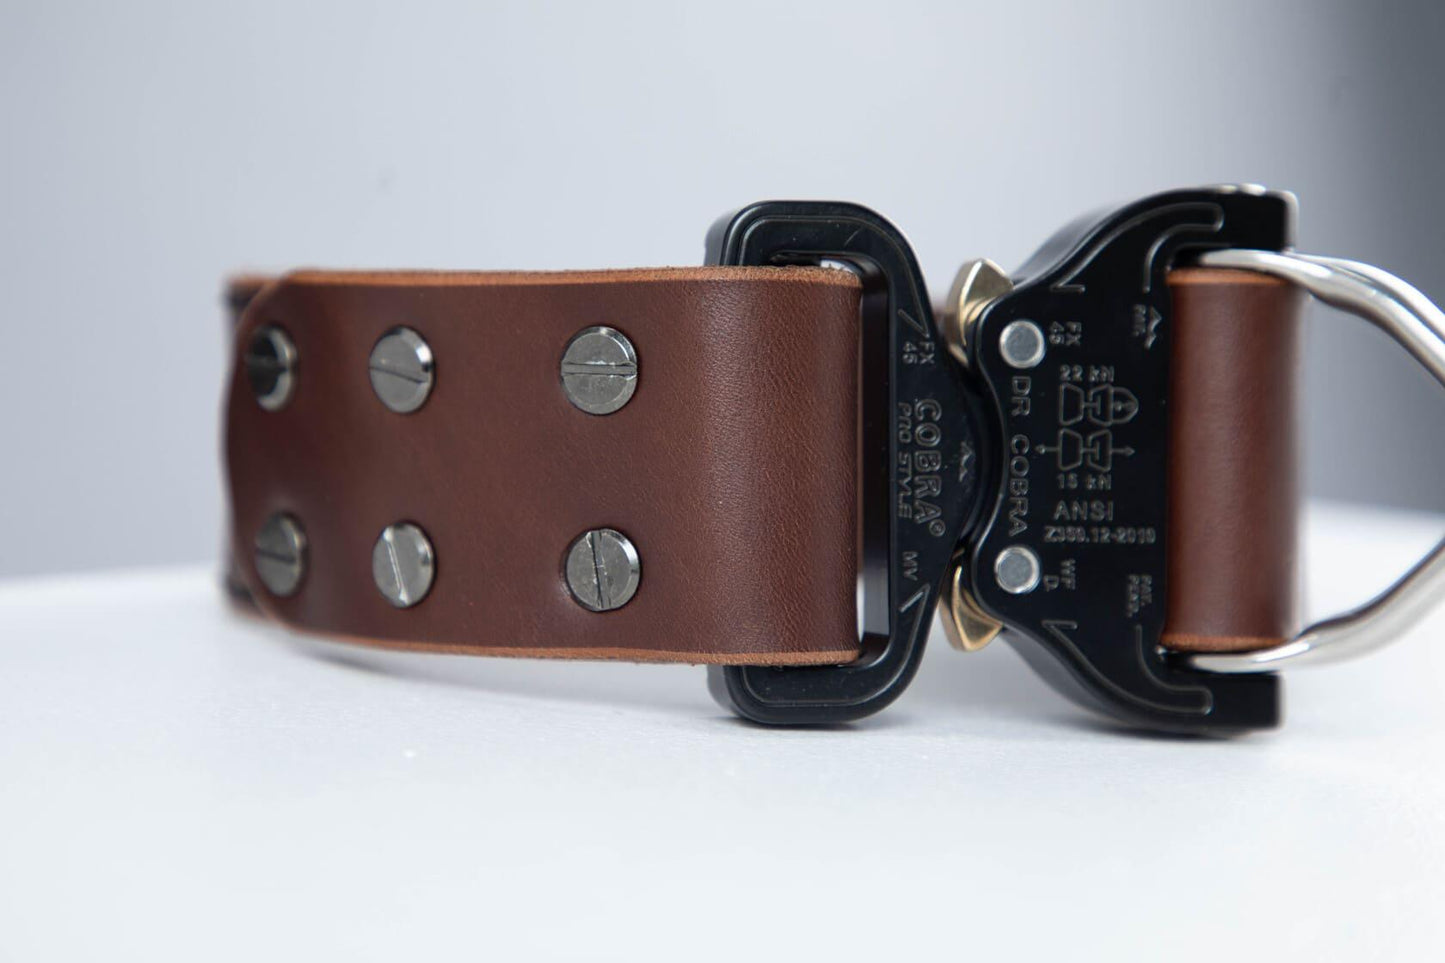 Brown leather dog collar with COBRA® buckle - premium dog goods handmade in Europe by My Wild Other